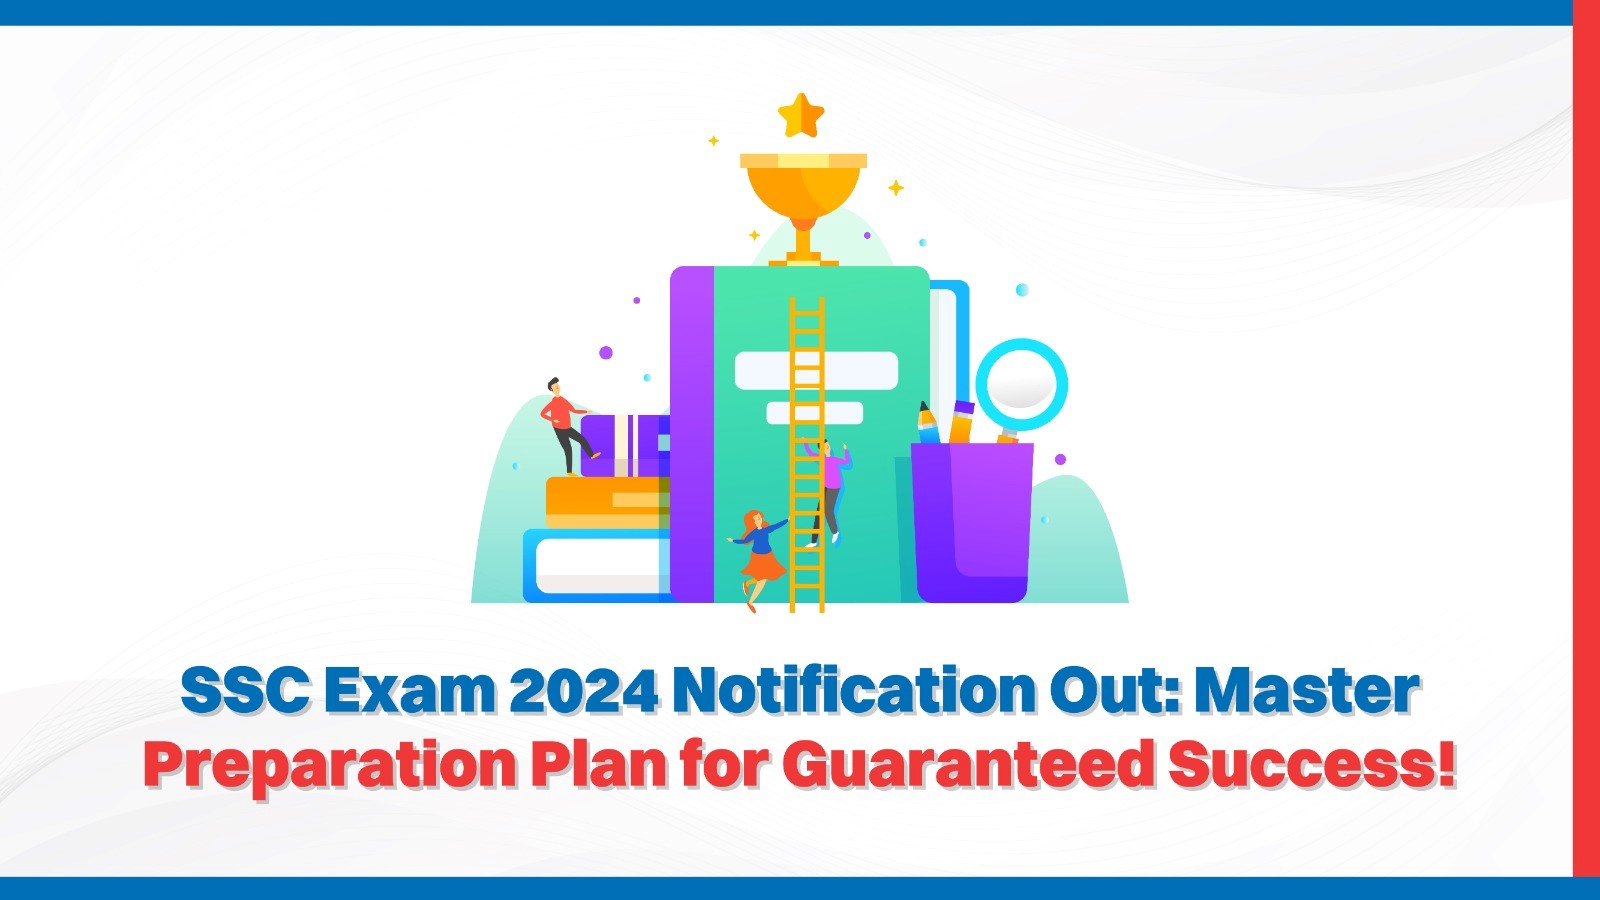 SSC Exam 2024 Notification Out Master Preparation Plan for Guaranteed Success.jpg